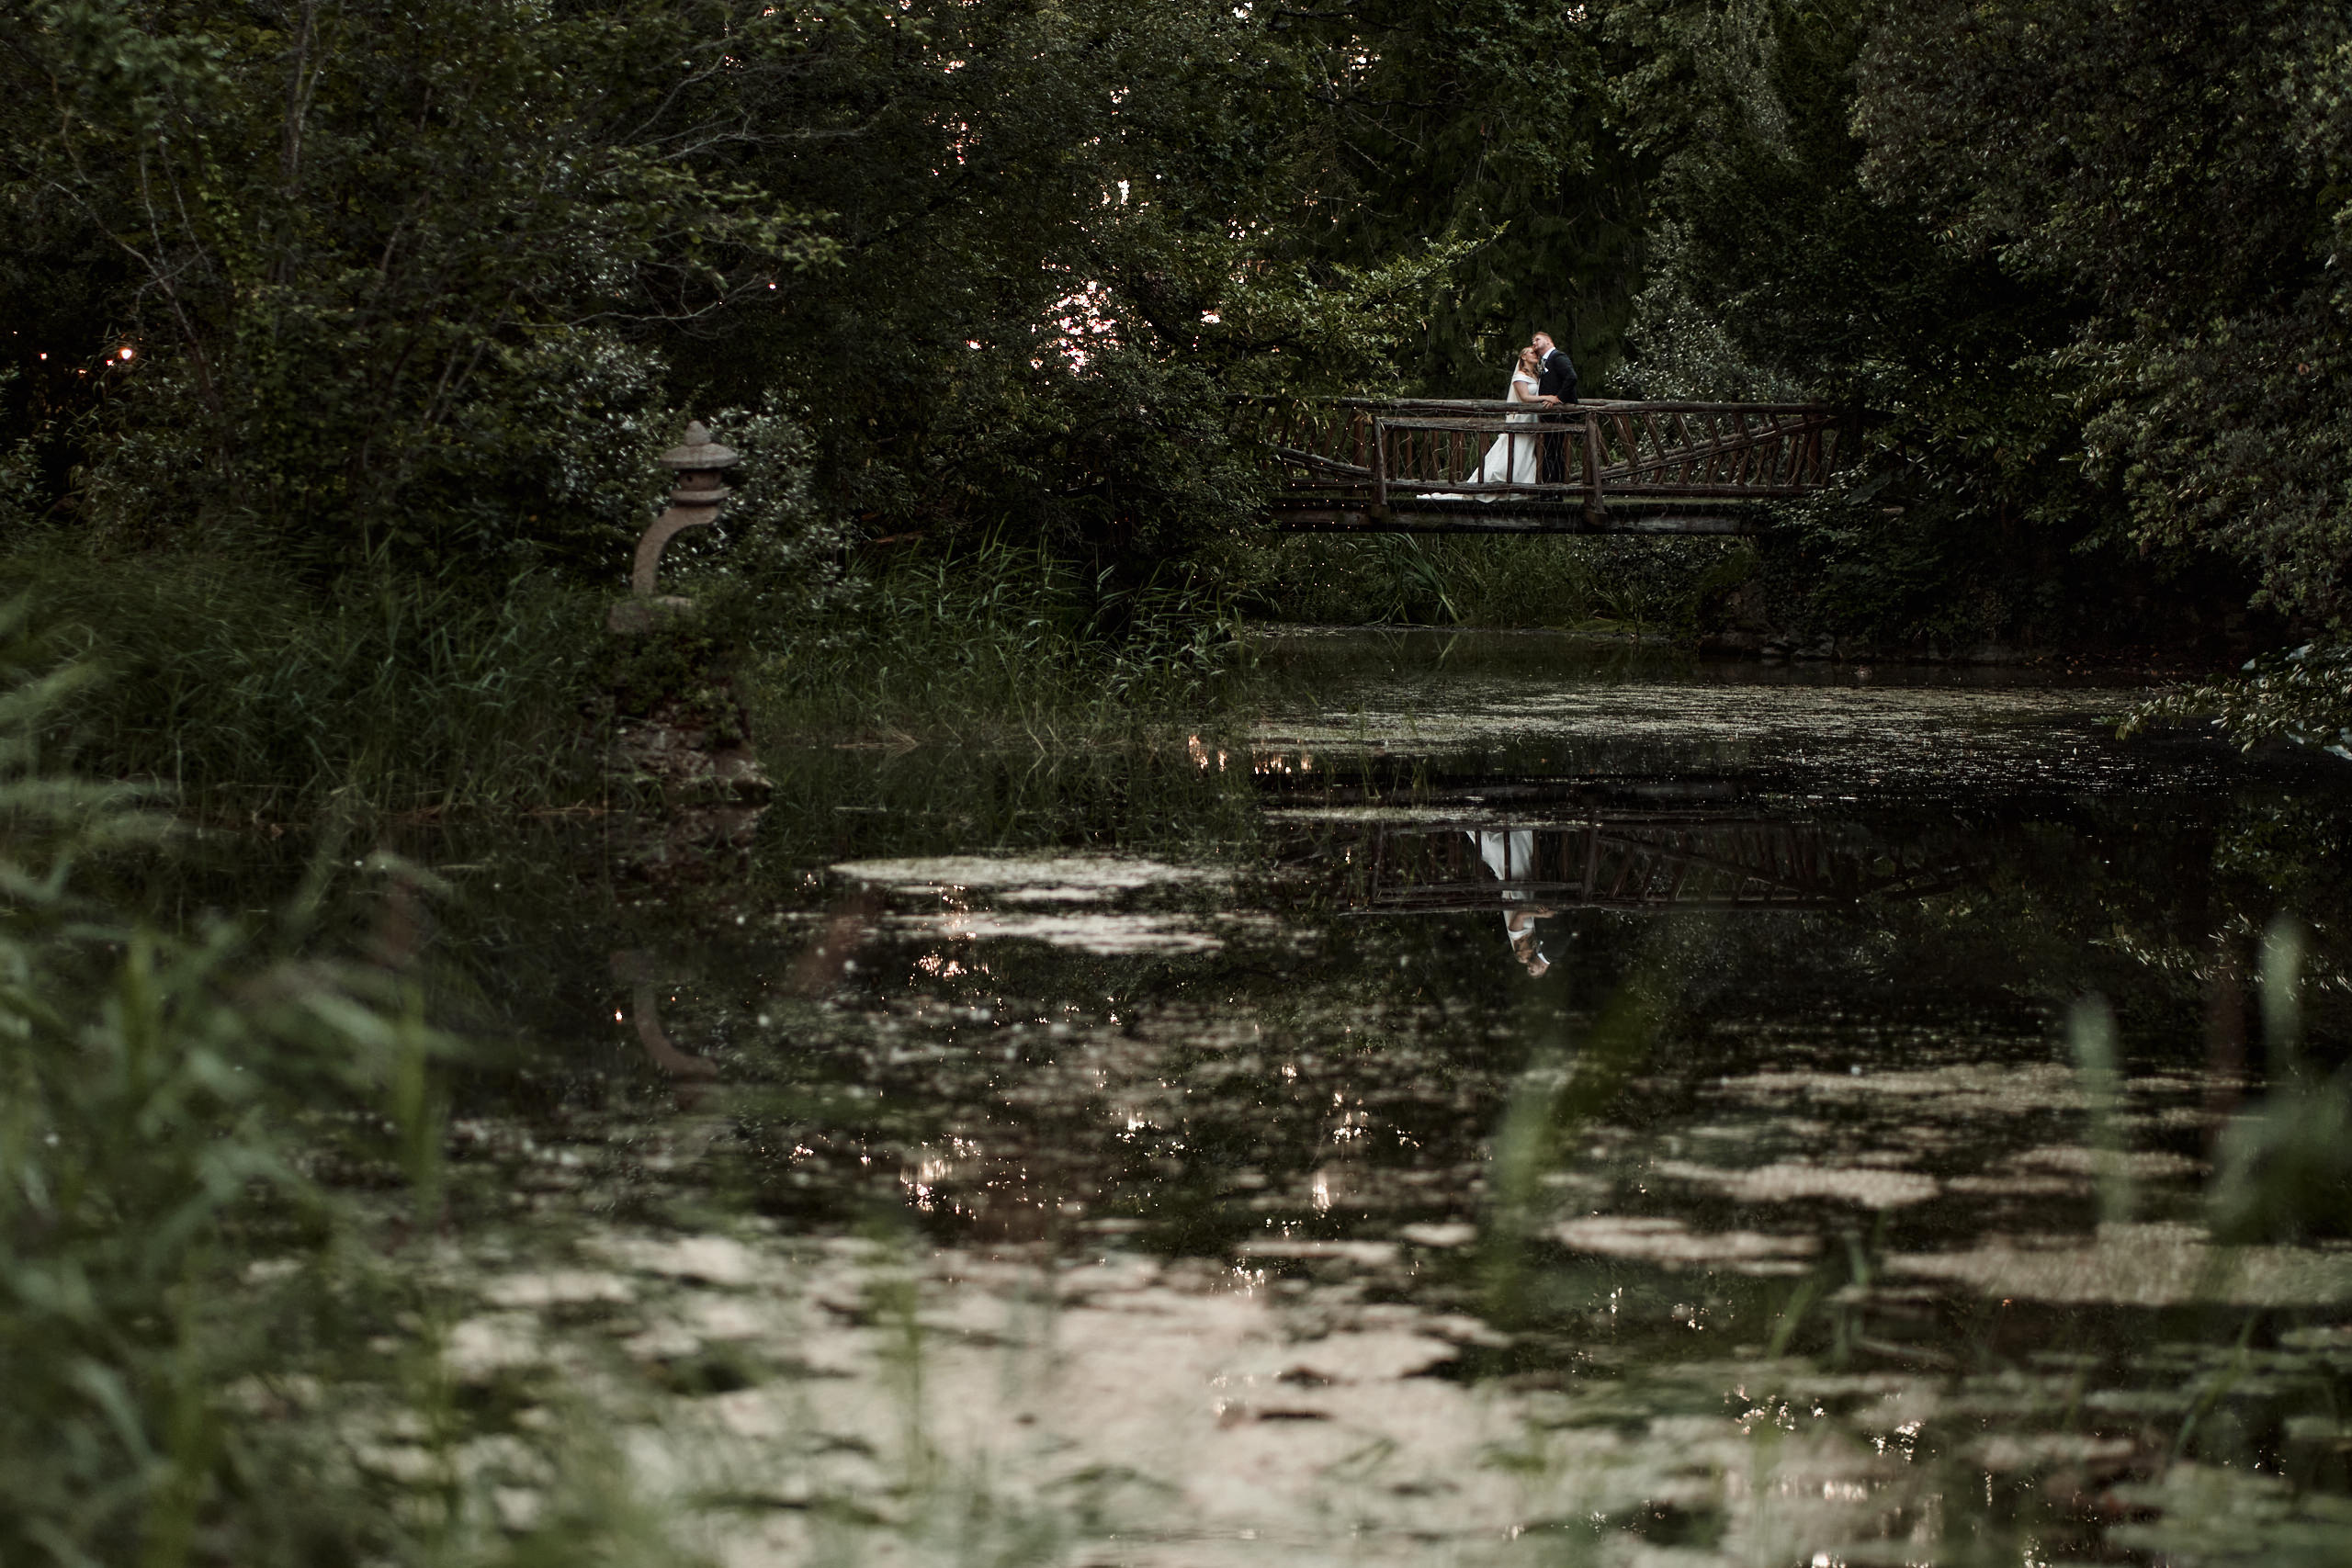 A couple getting married standing on a bridge above a pond.